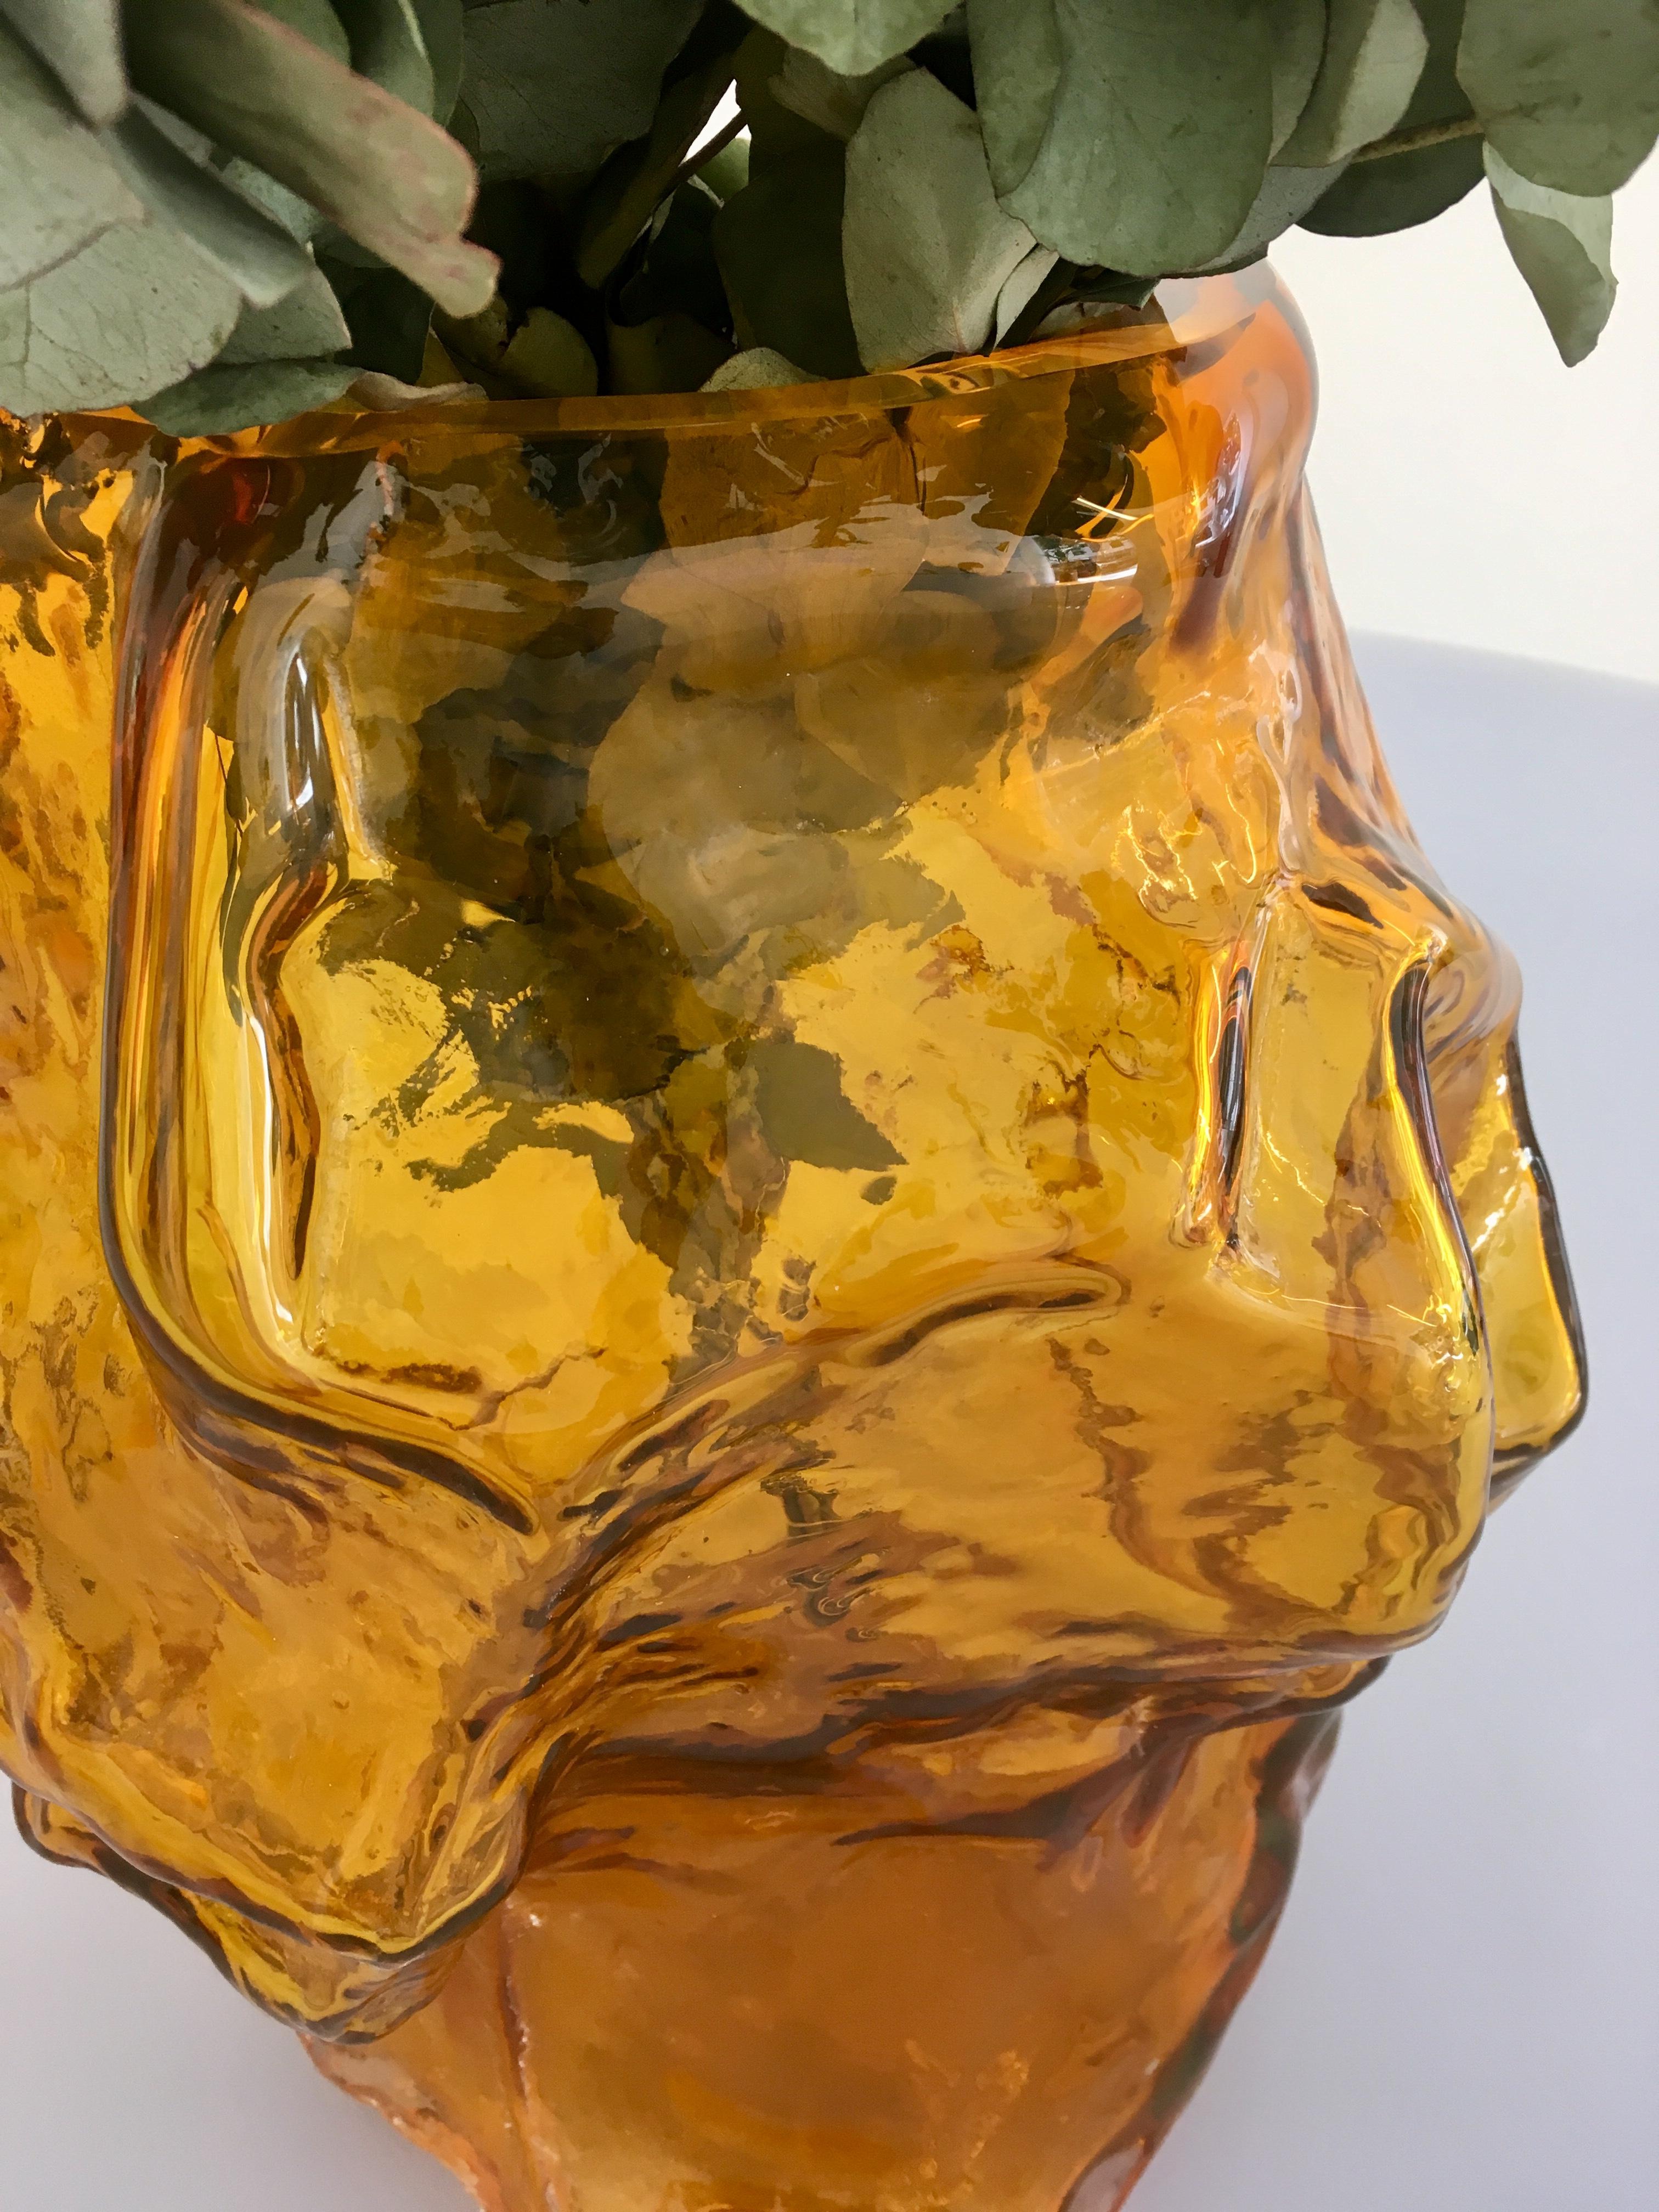 Post-Modern Contemporary Design Unique Glass 'Mountain' Vase by Fos, Amber